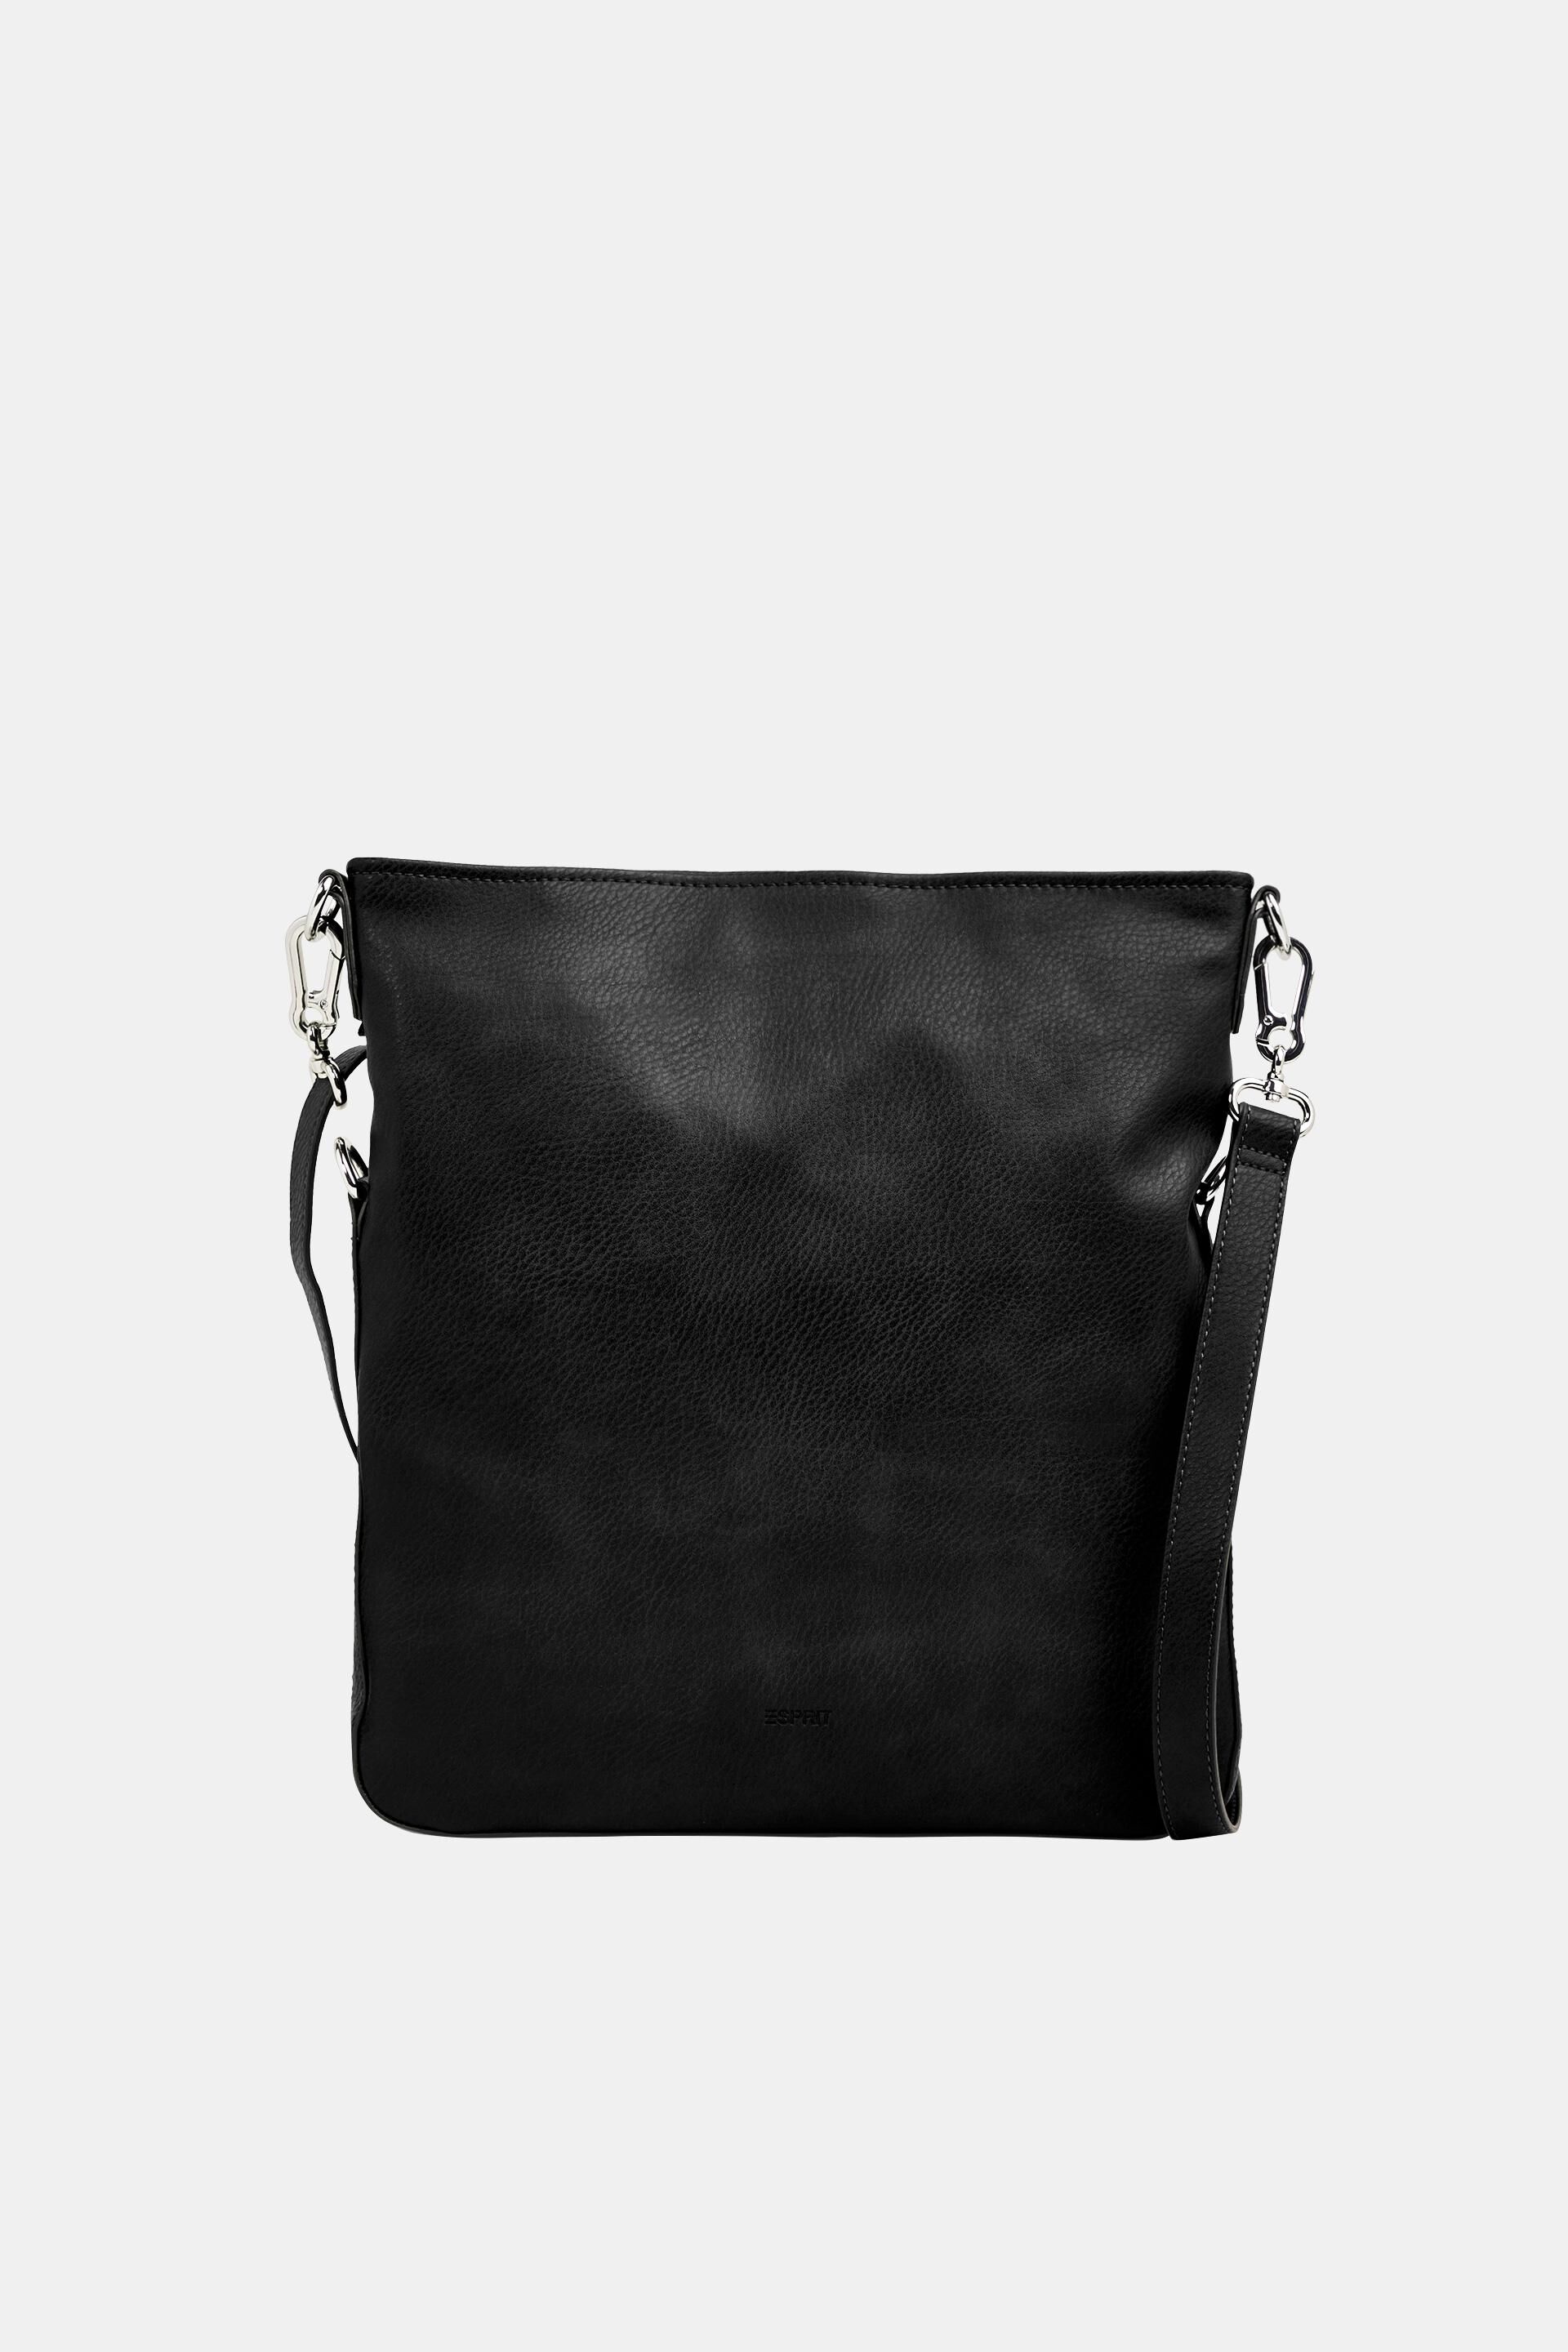 Esprit Online Store Flapover bag in faux leather